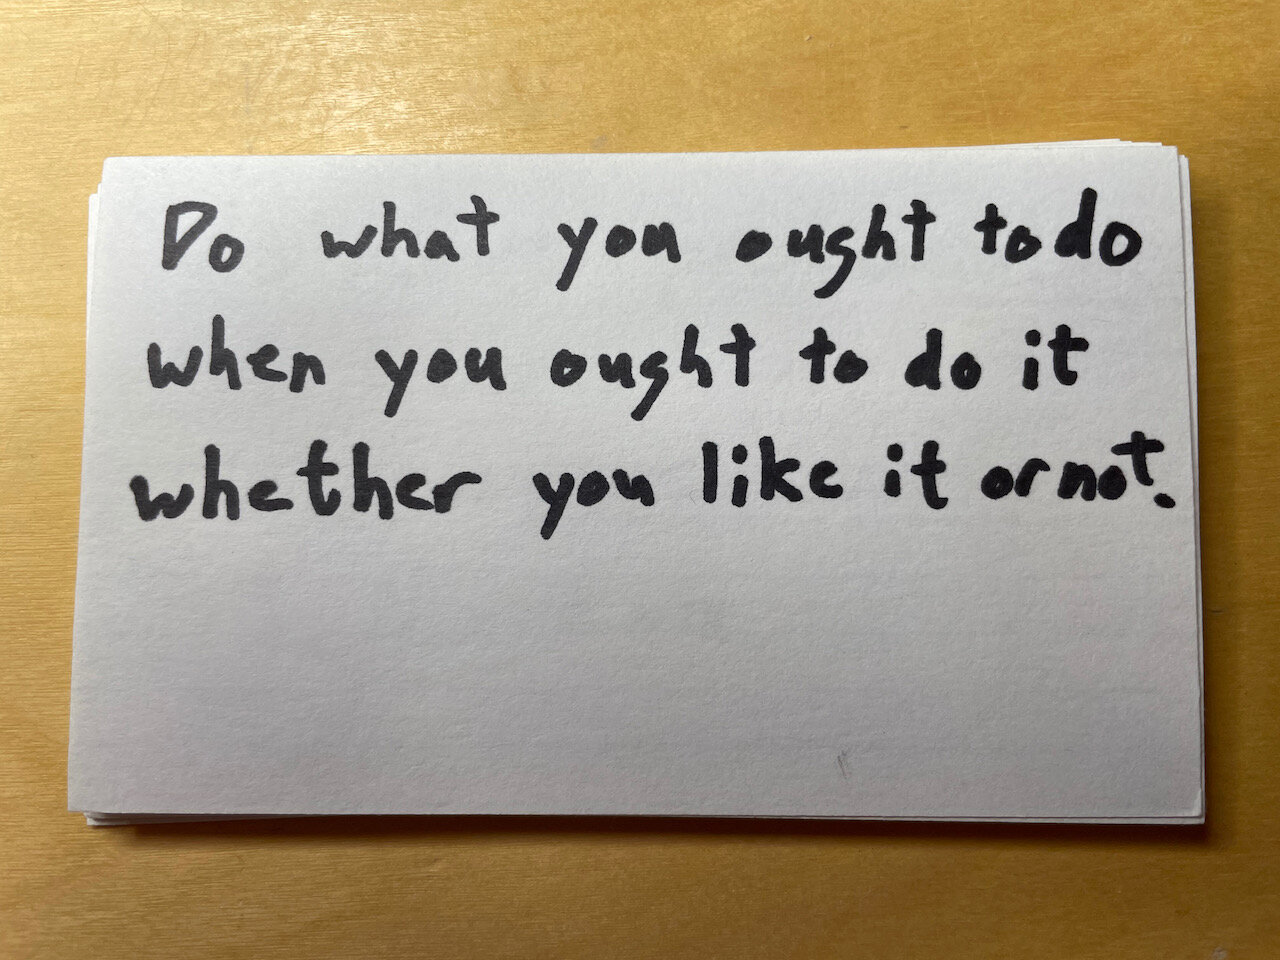 Do what you ought to do when you ought to do it whether you like it or not.